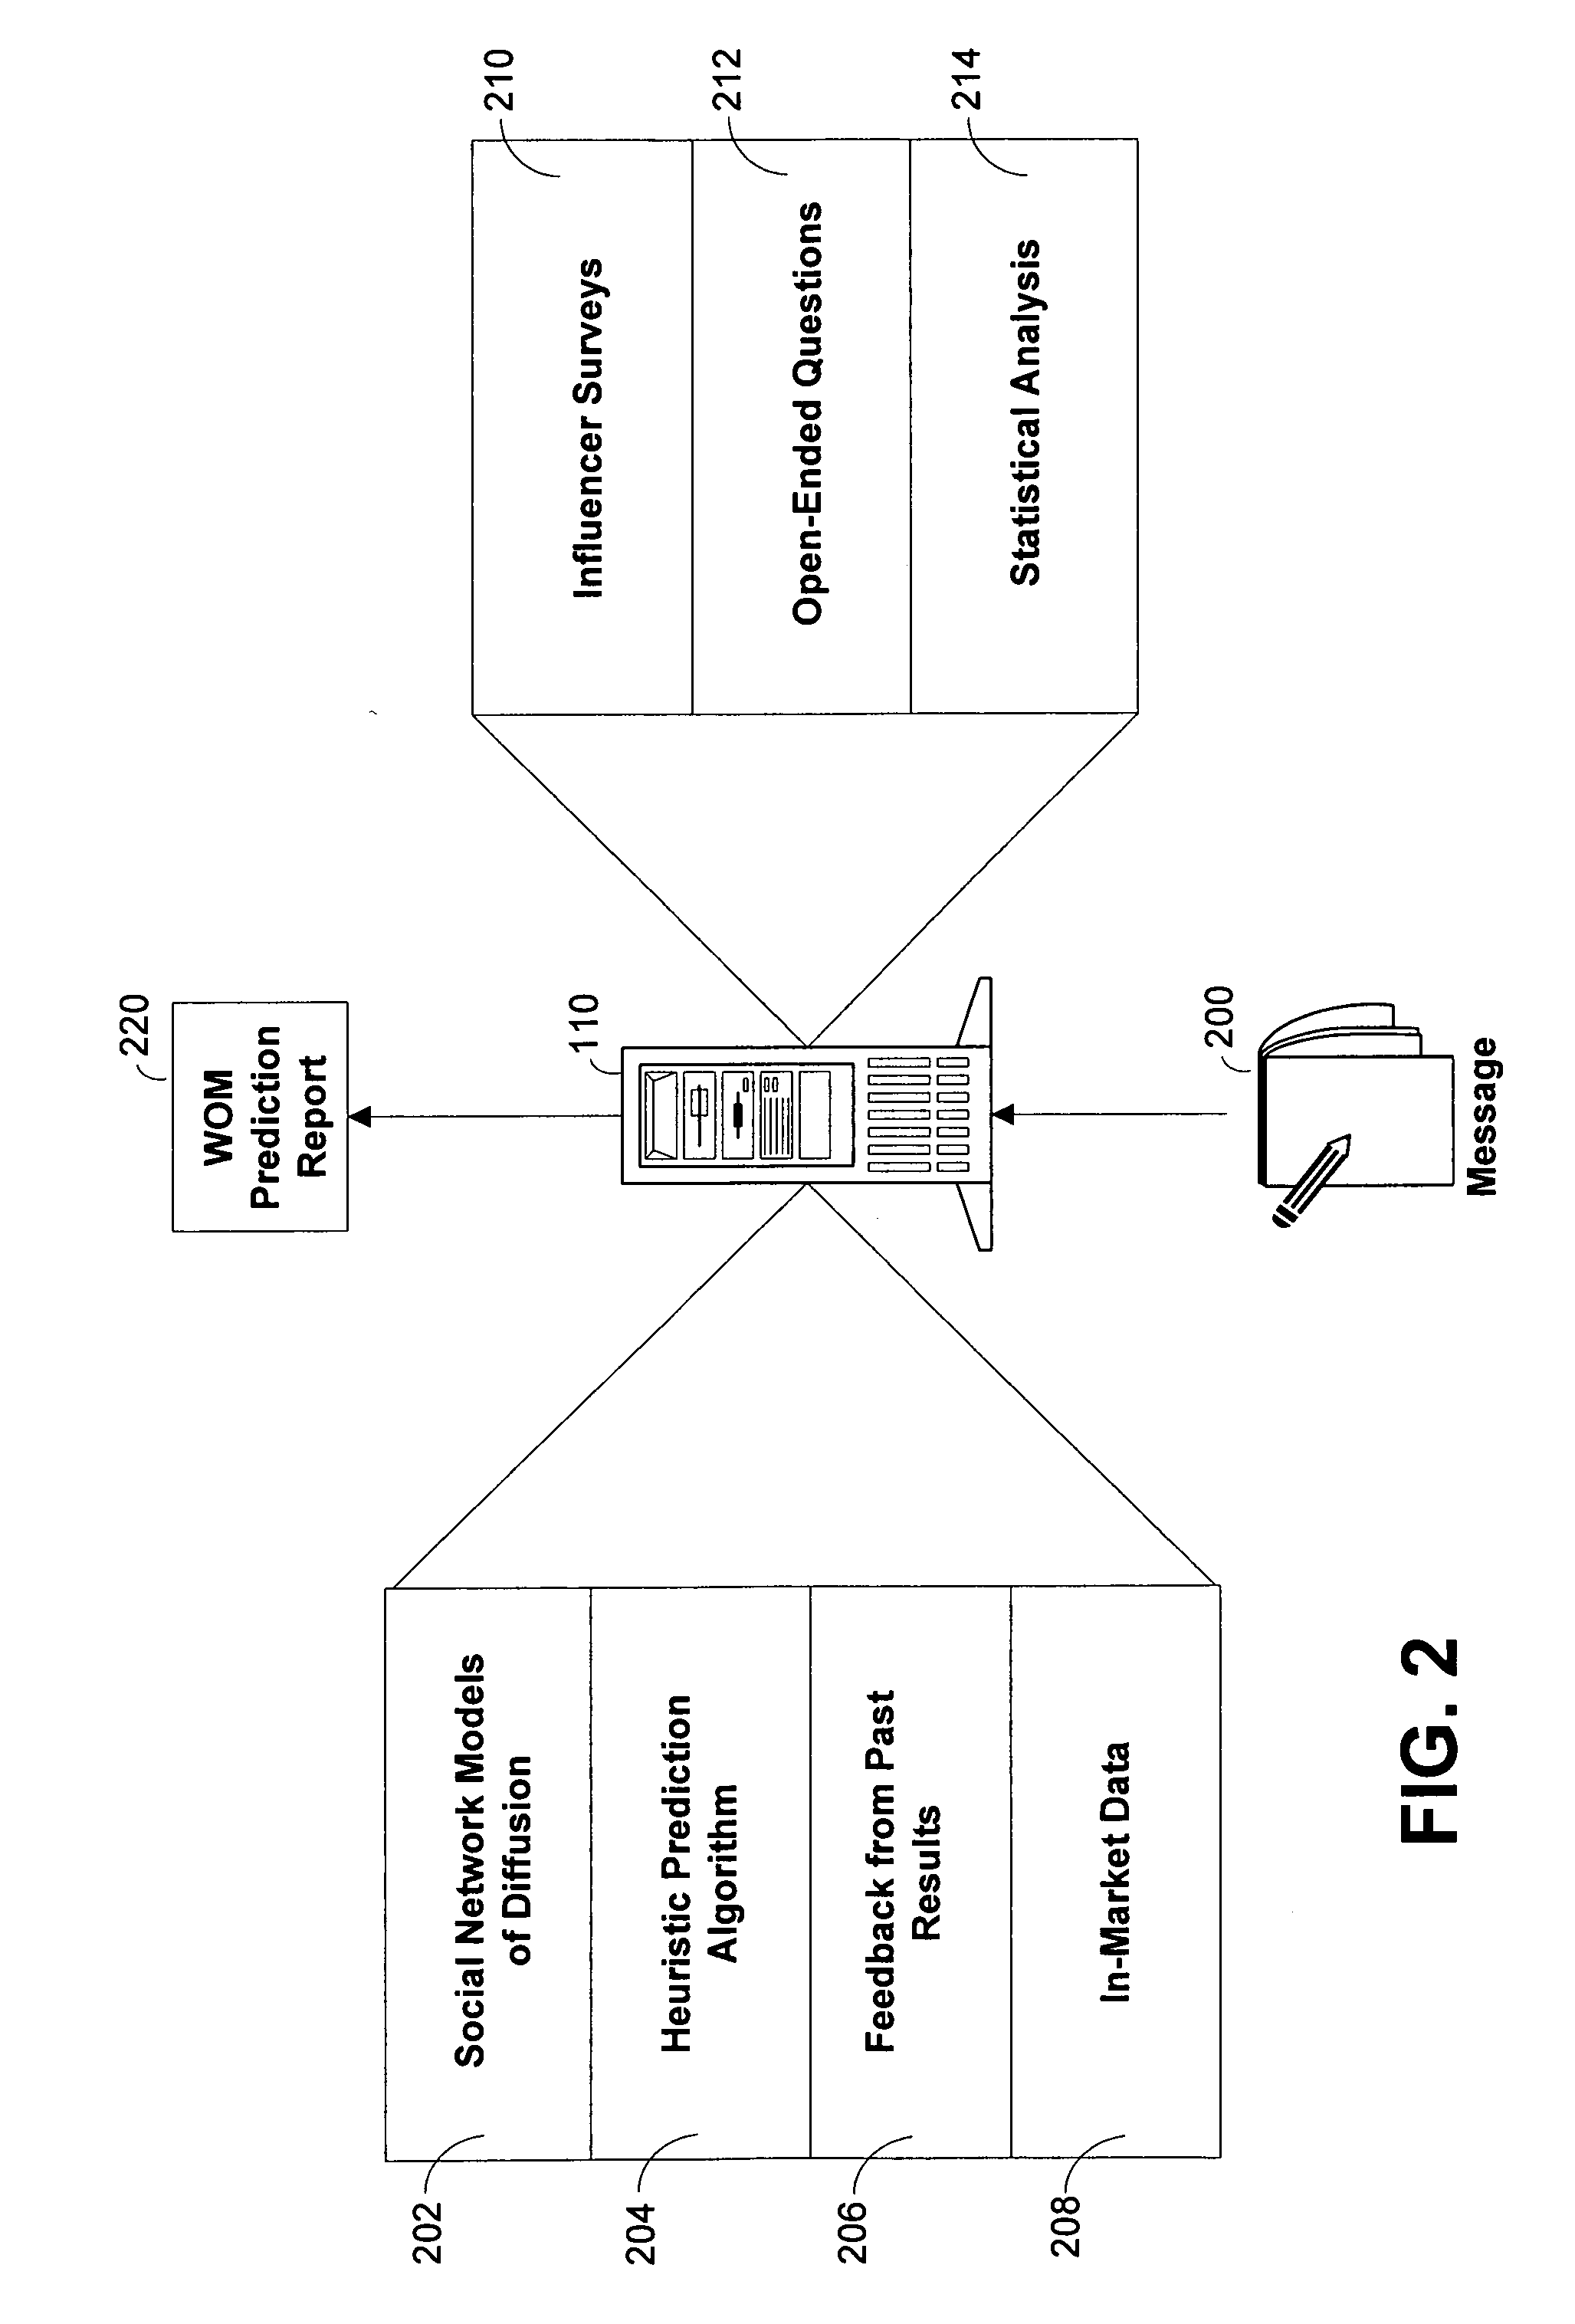 Systems and methods for predicting the efficacy of a marketing message